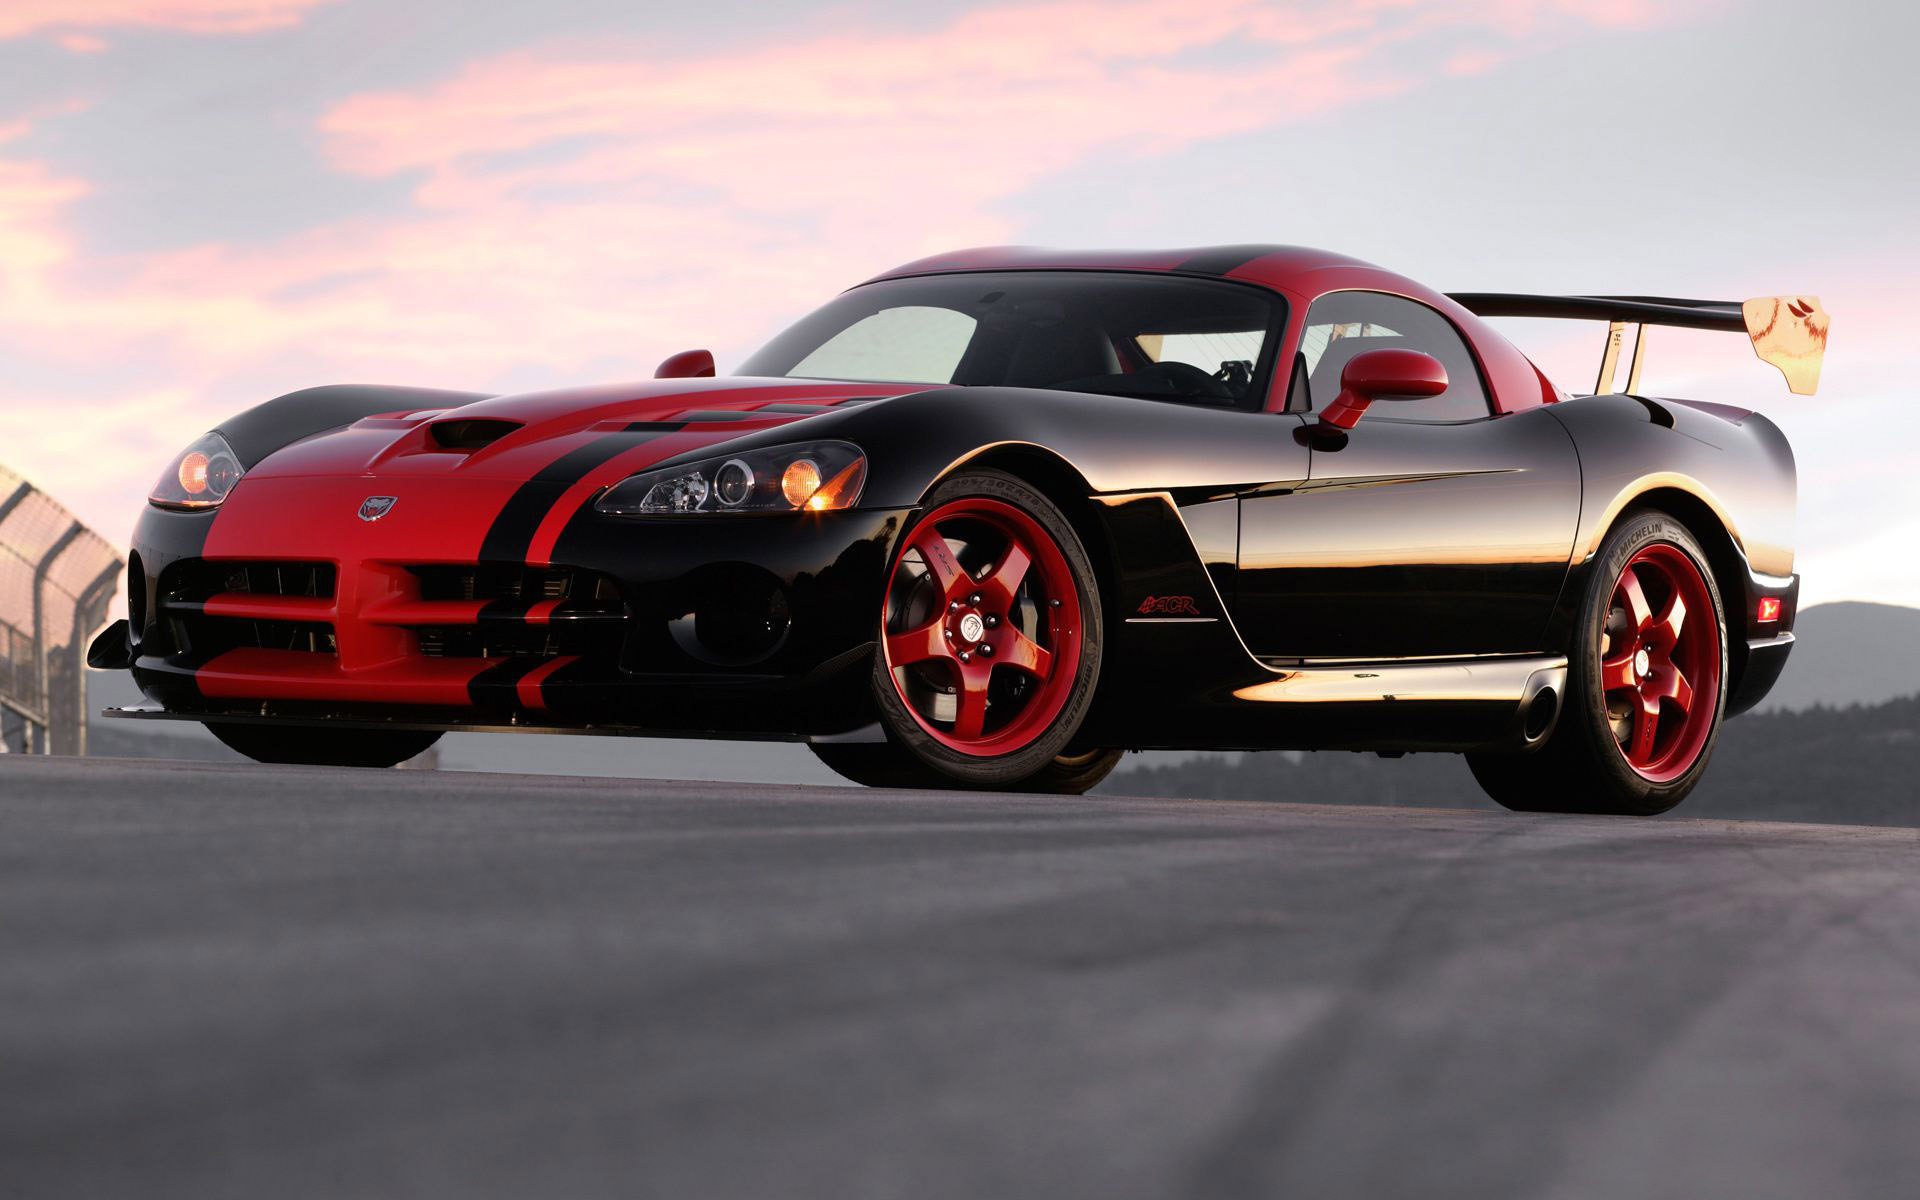 Dodge Viper, HD wallpapers, Background collection, Automotive beauty, 1920x1200 HD Desktop